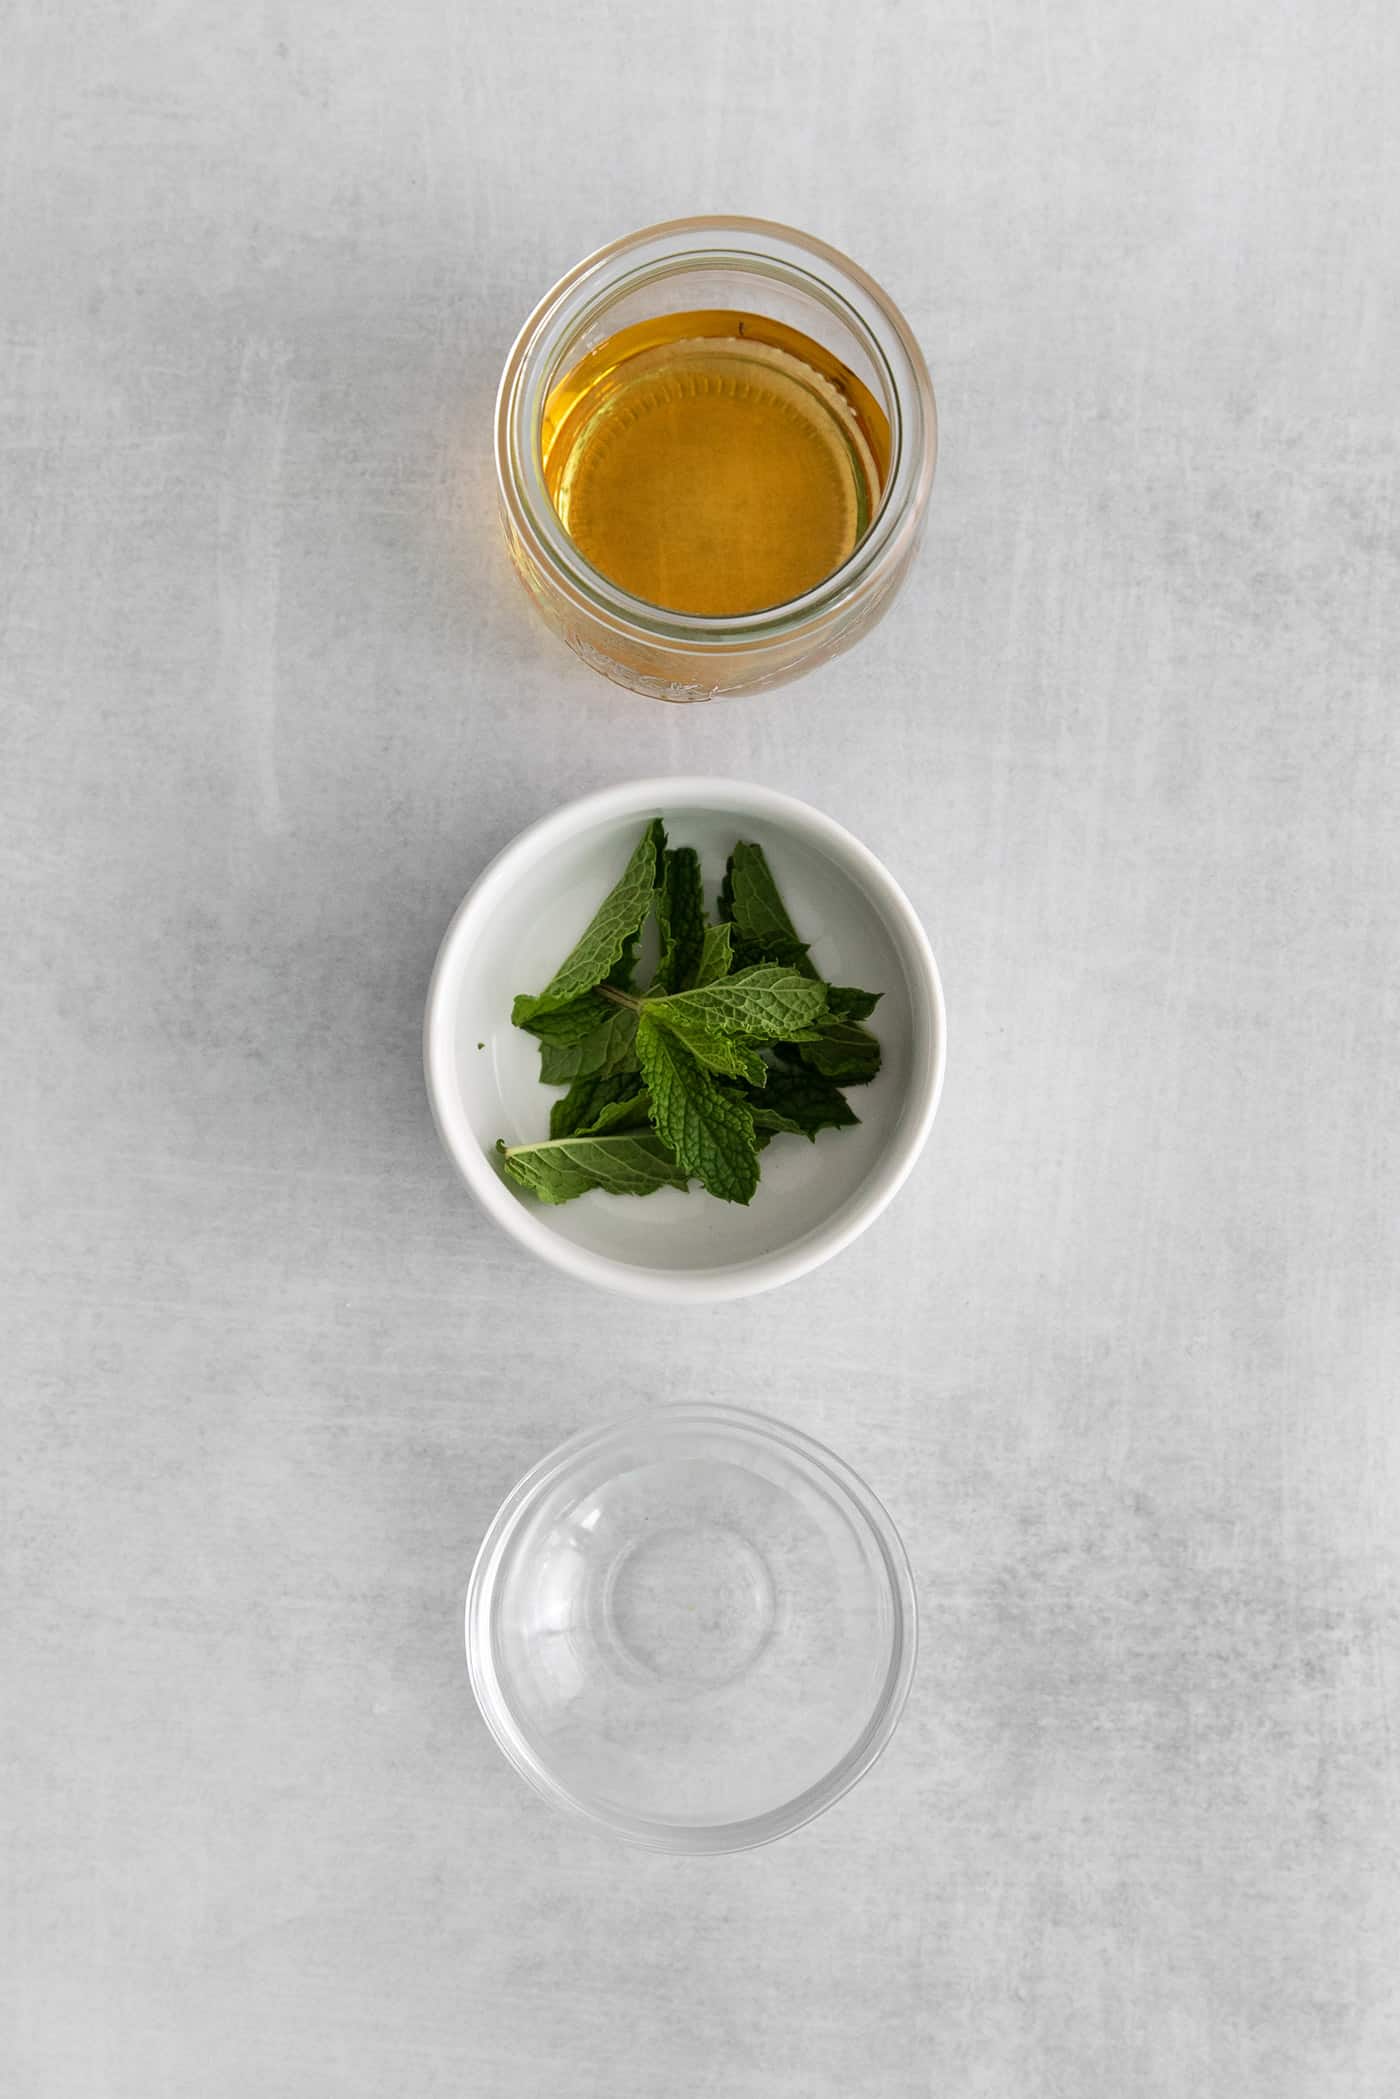 bourbon, fresh mint leaves, and simple syrup